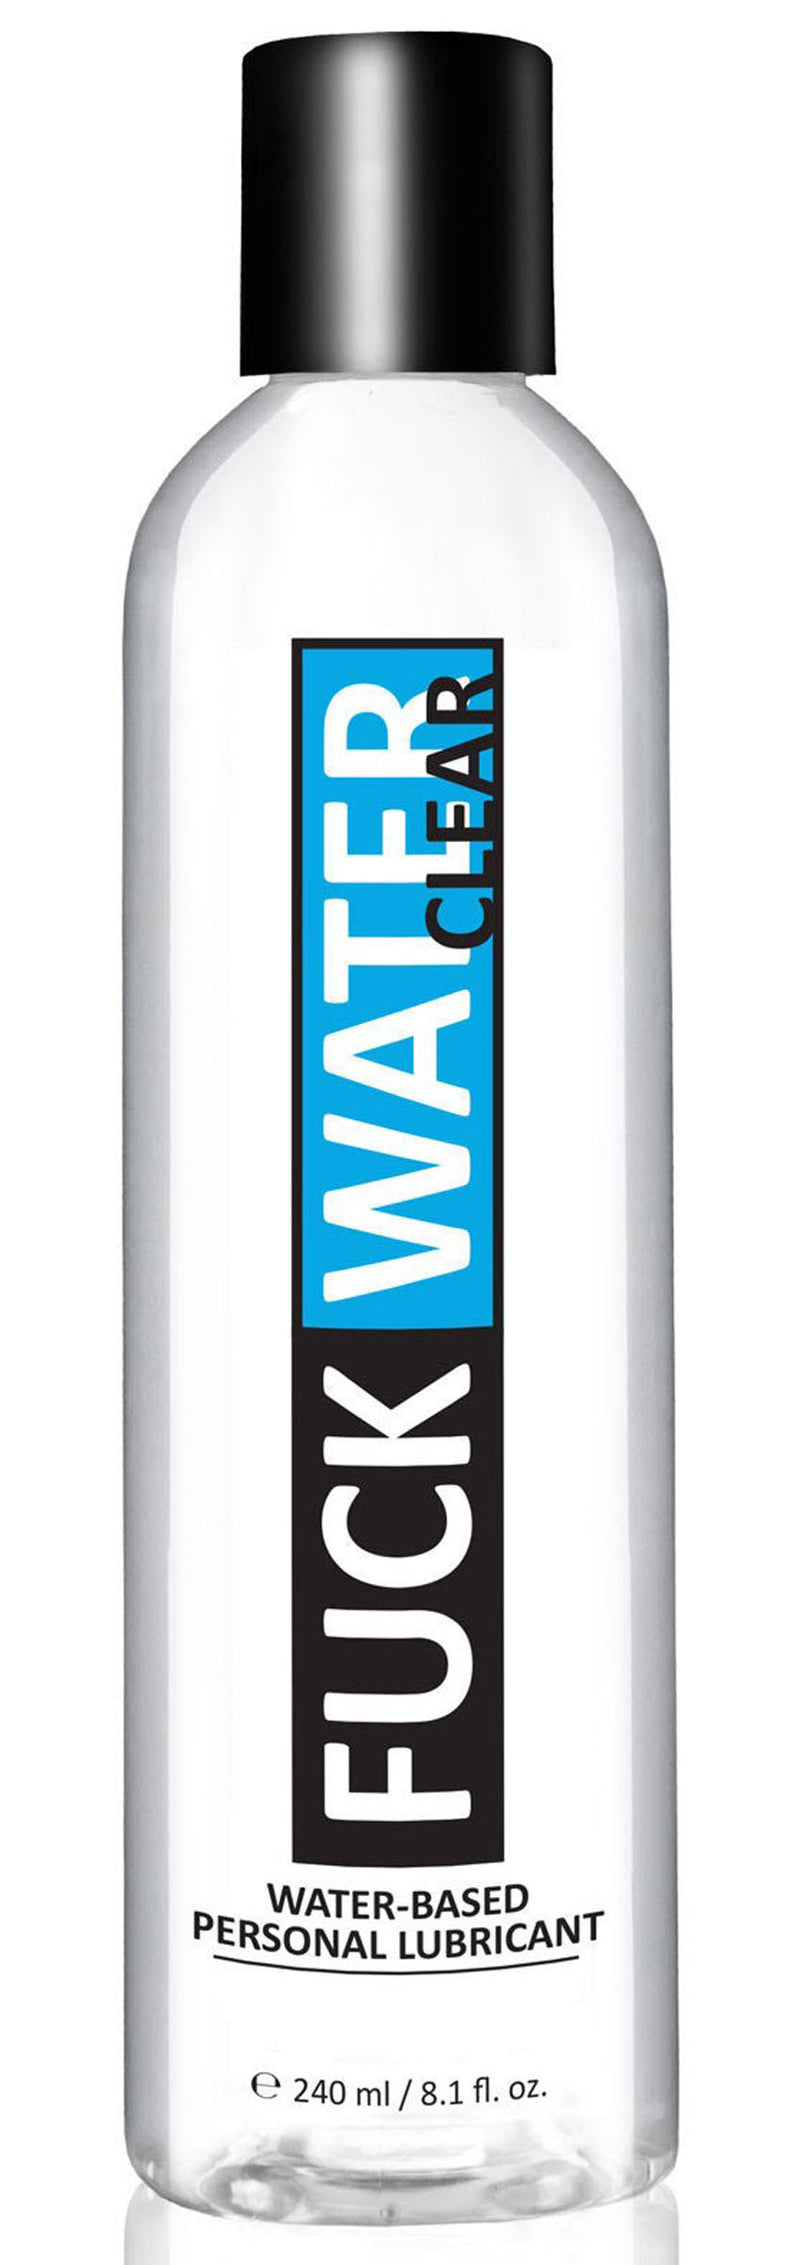 Clear Water-Based Lubricant for Enhanced Intimacy and Condom Compatibility - Fuck Water Clear 8.1oz